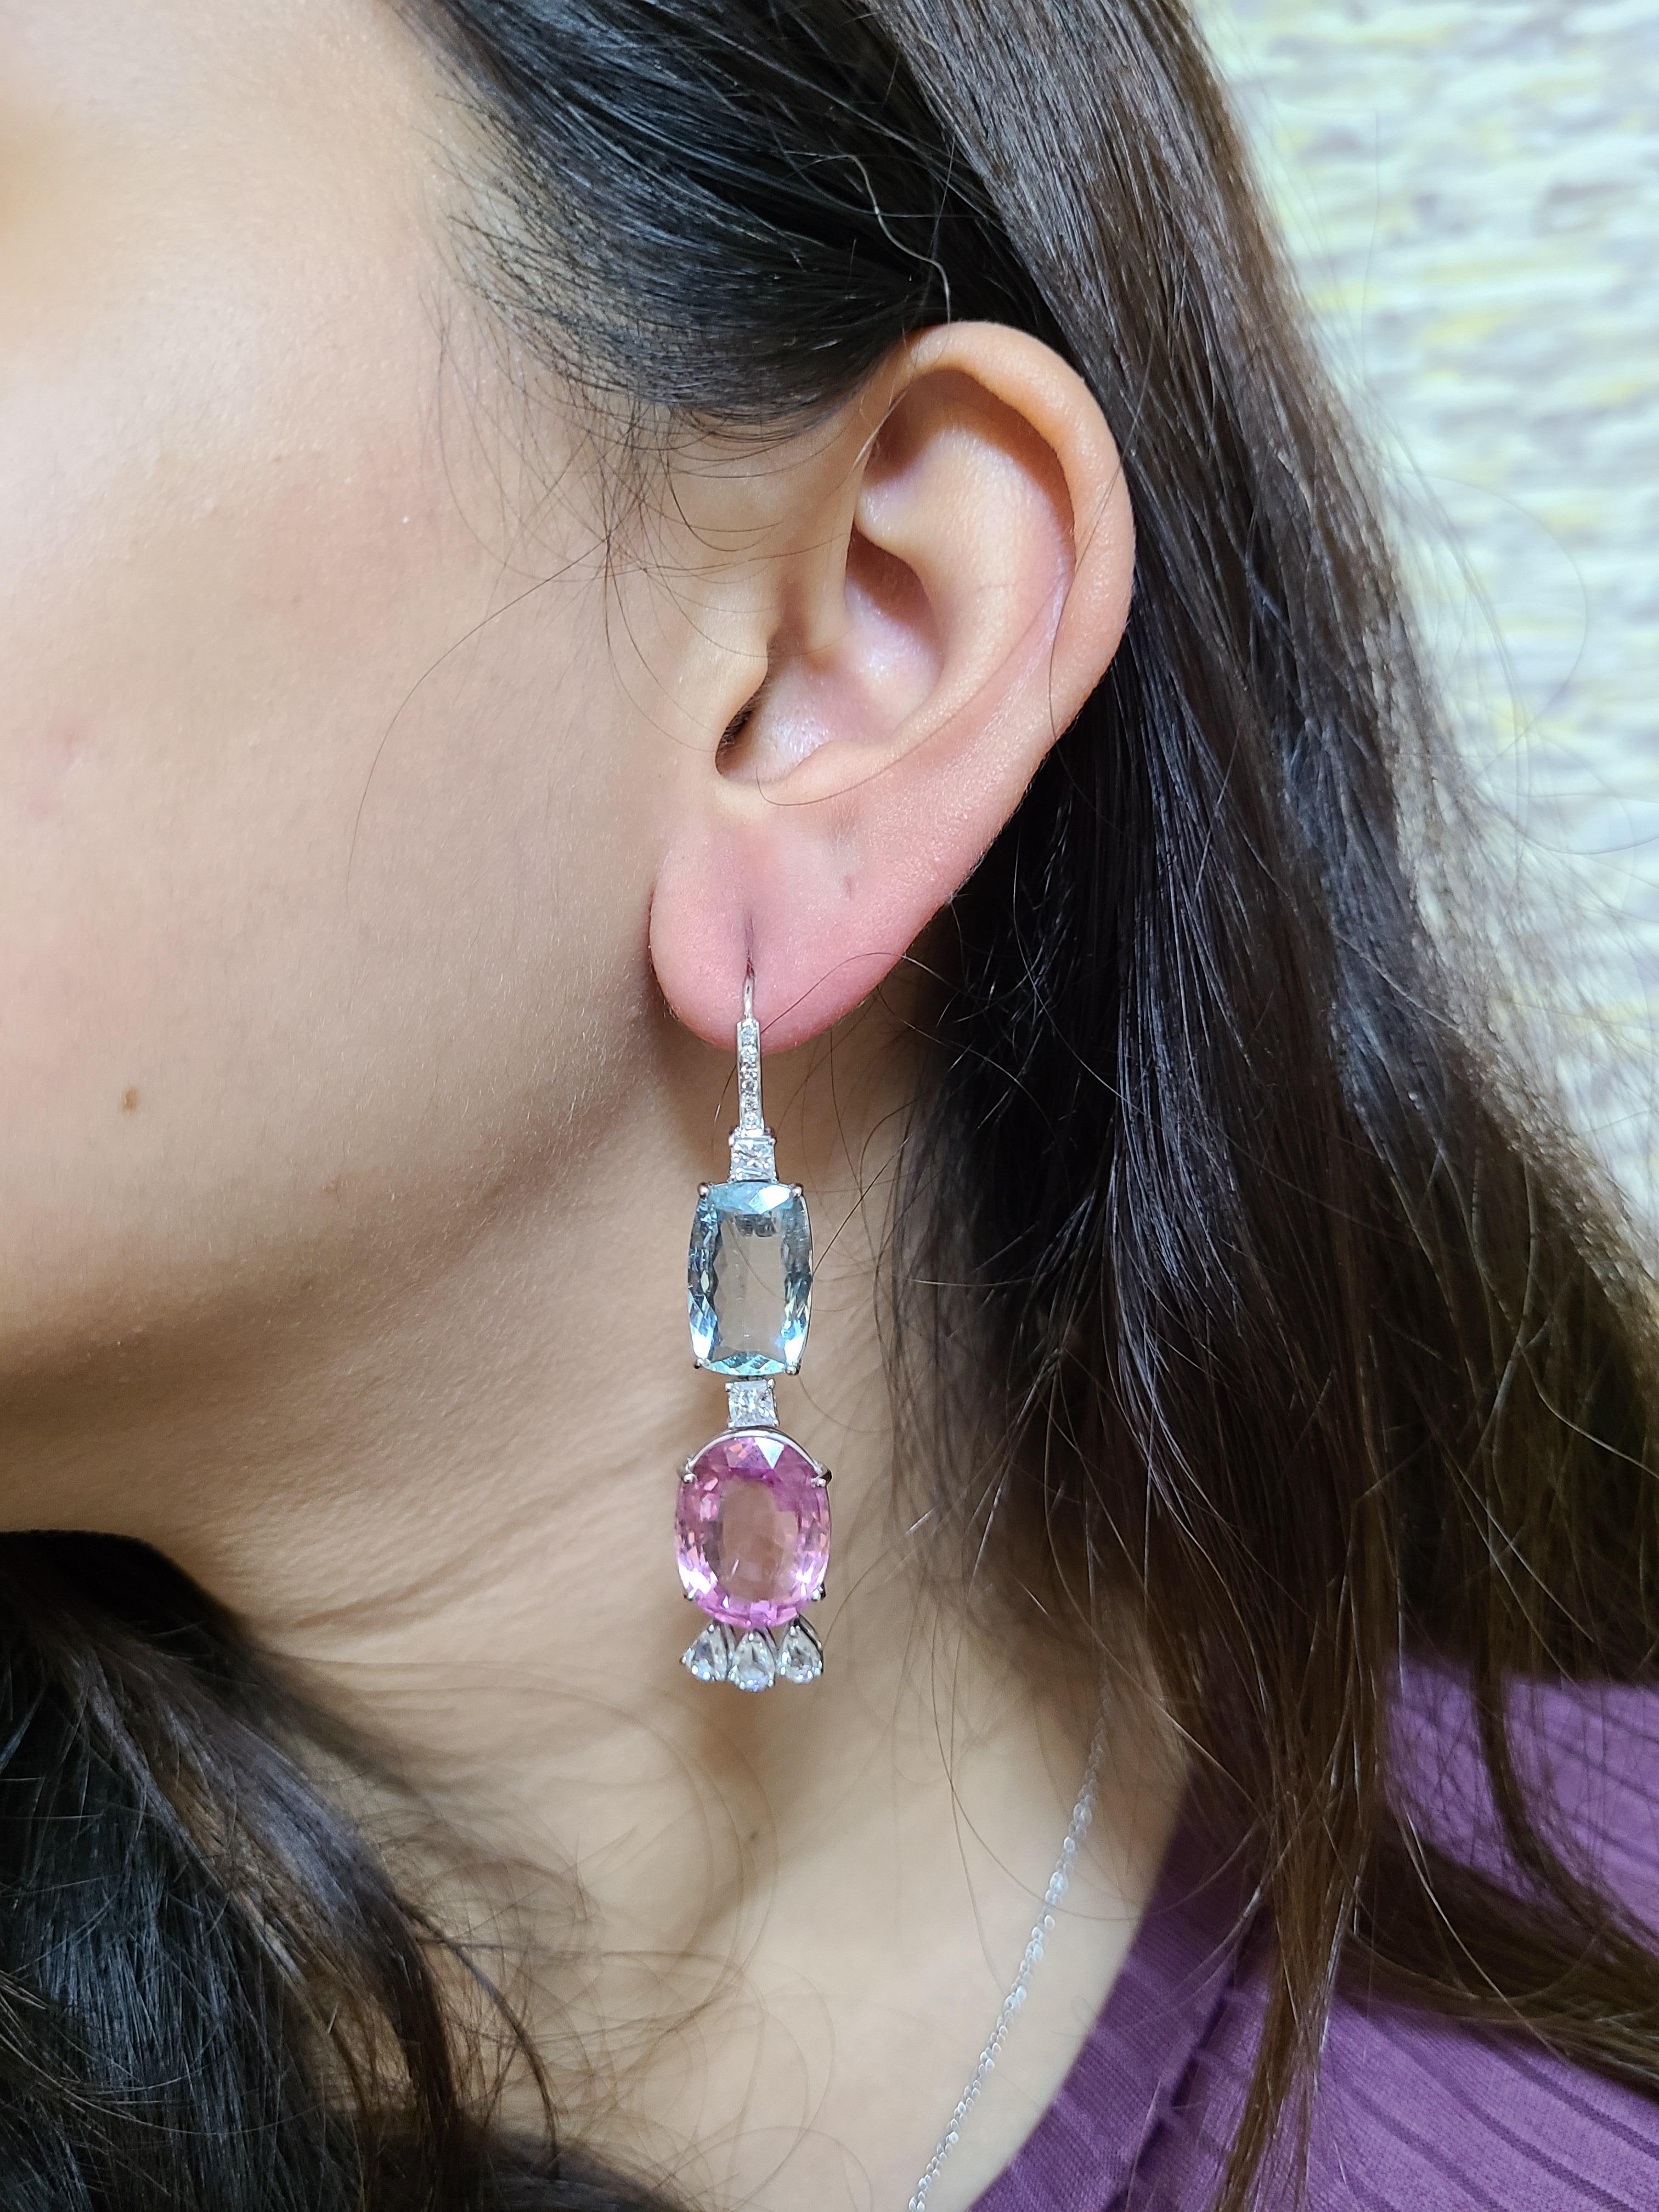 A very chic pair of Aquamarine, Pink Tourmaline and Rose Cut Diamonds Earrings set in 18K Gold. The combined weight of the Aquamarine & Tourmaline combined is 38.25 carats. Both the stones are completely natural and without any treatment. The weight